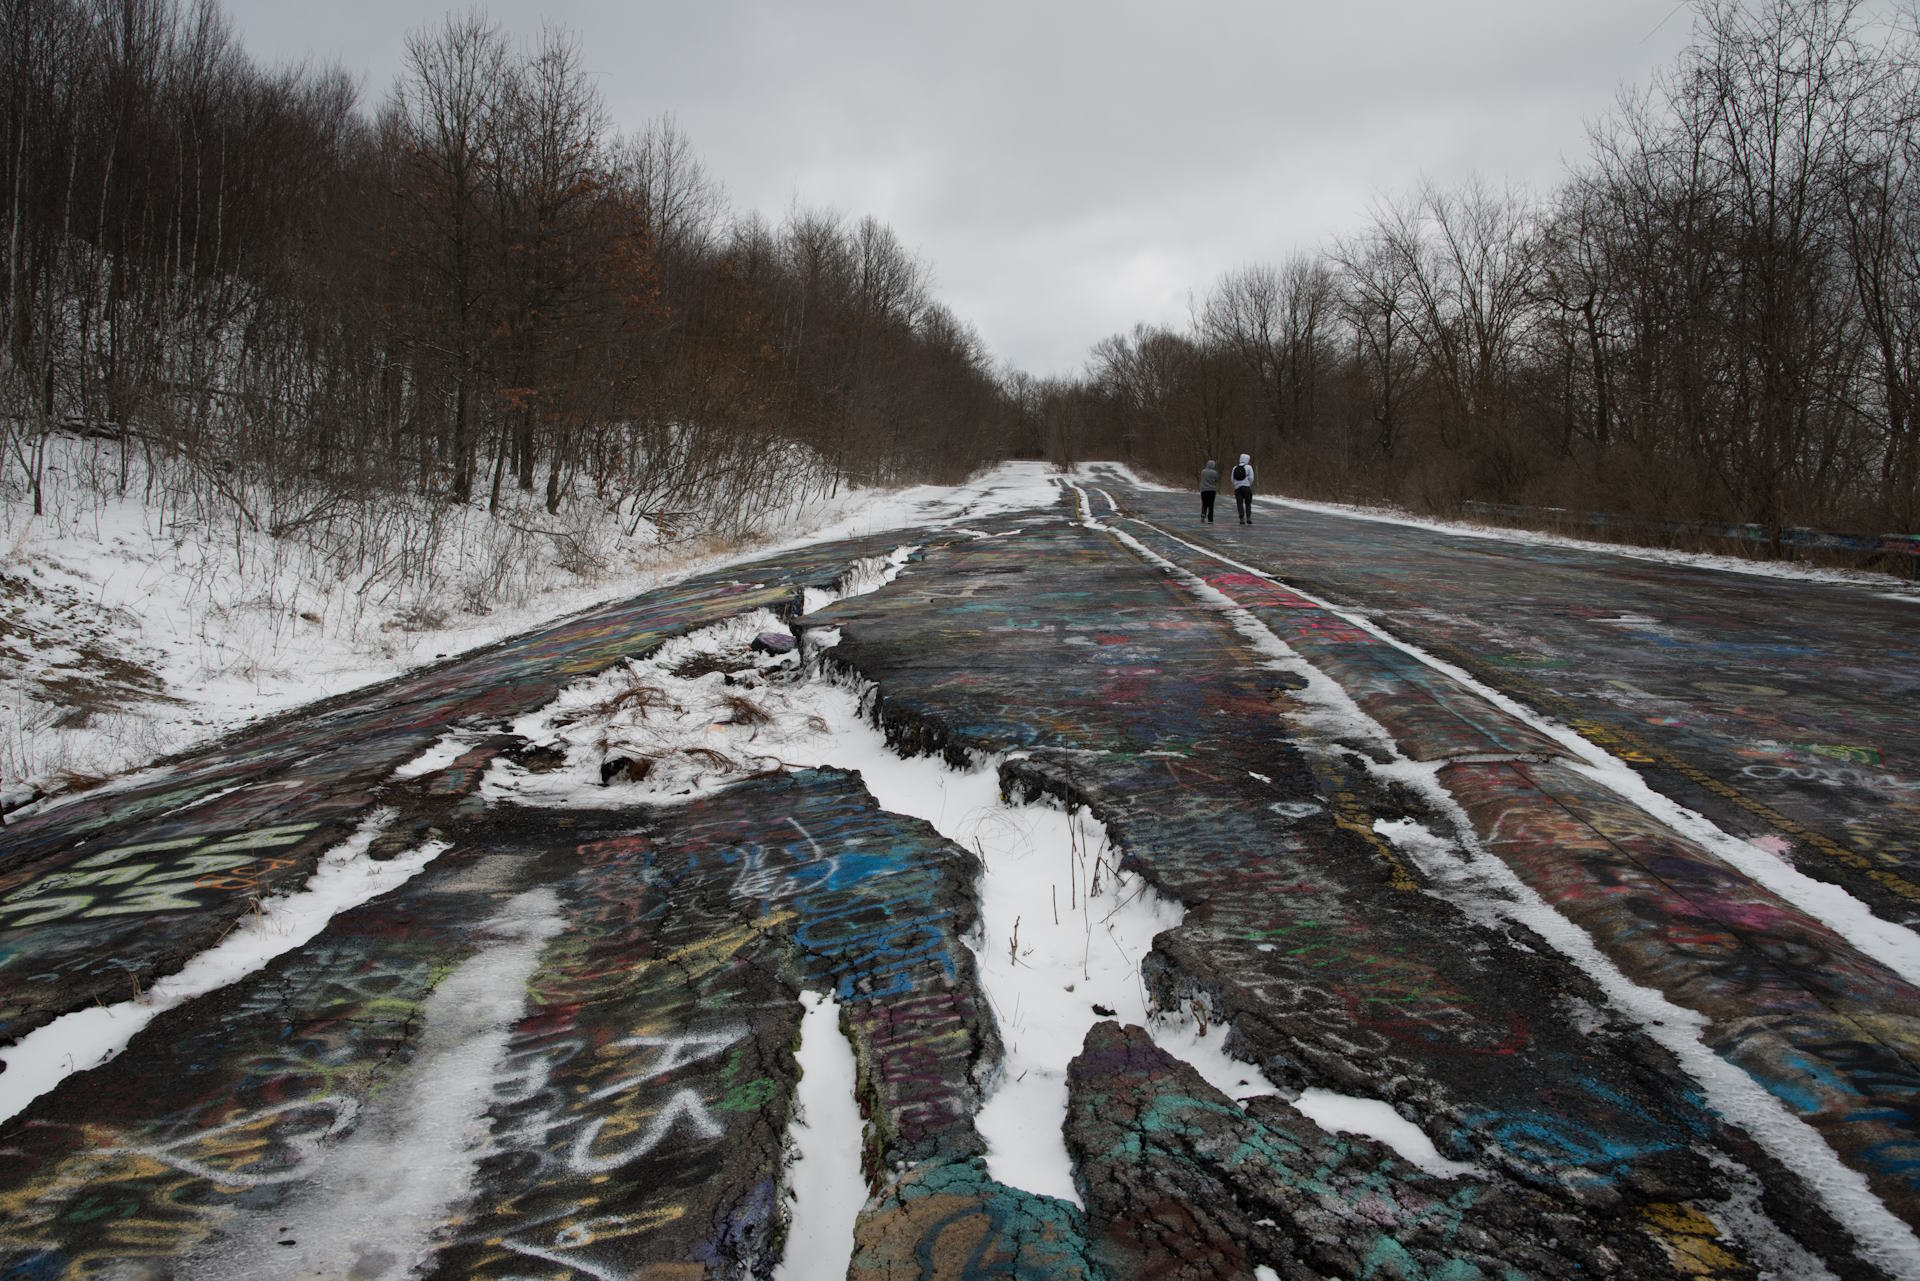 Centralia, the town that sits on an incessant underground fire, and other ghost towns